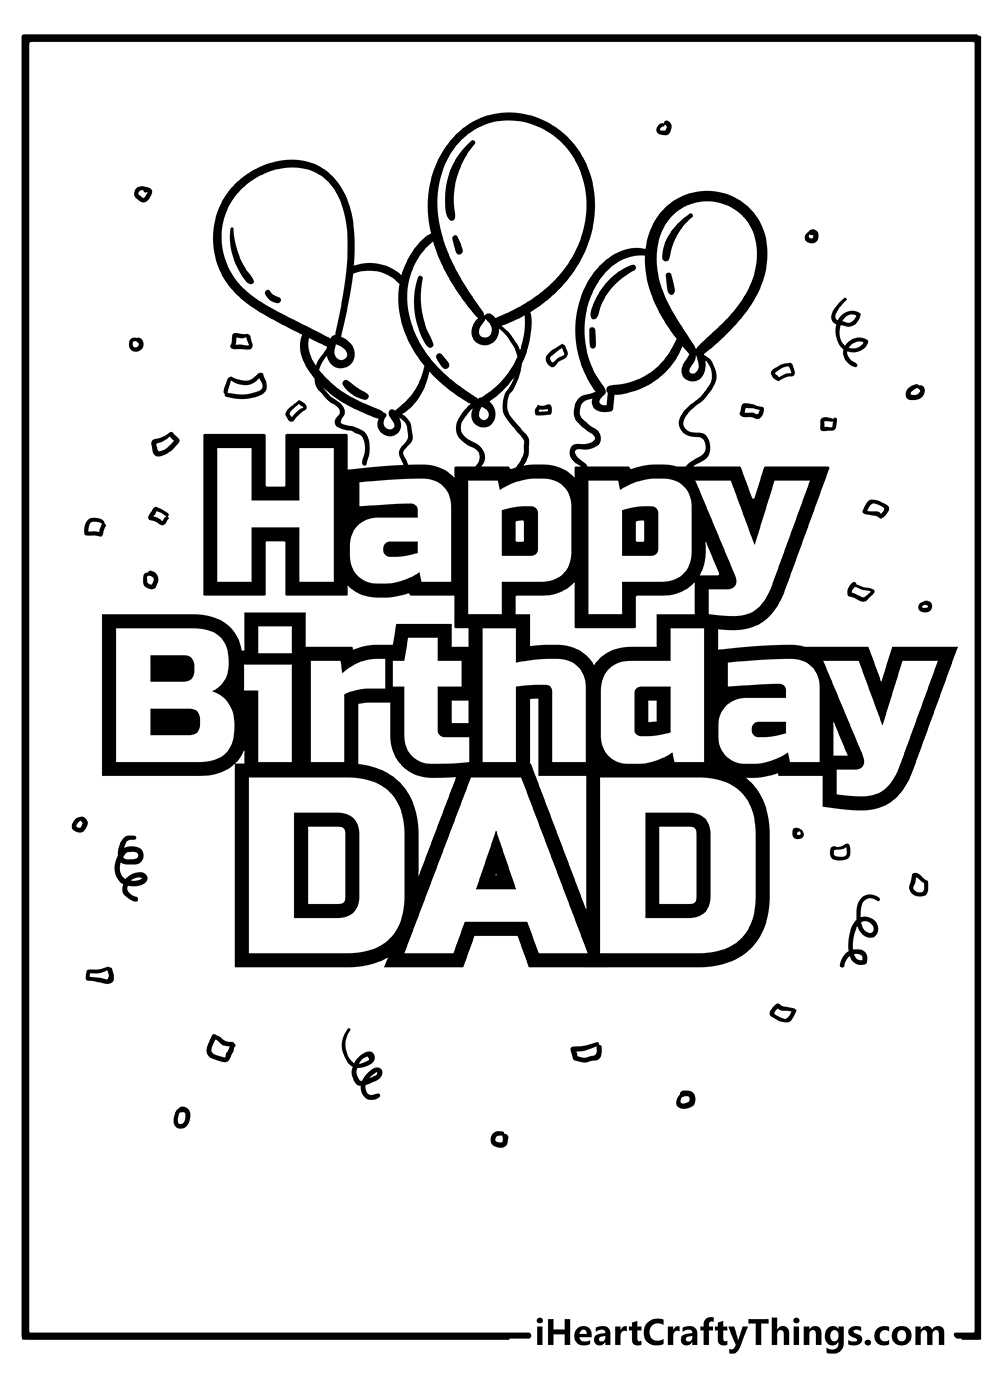 Happy birthday dad coloring pages free printables